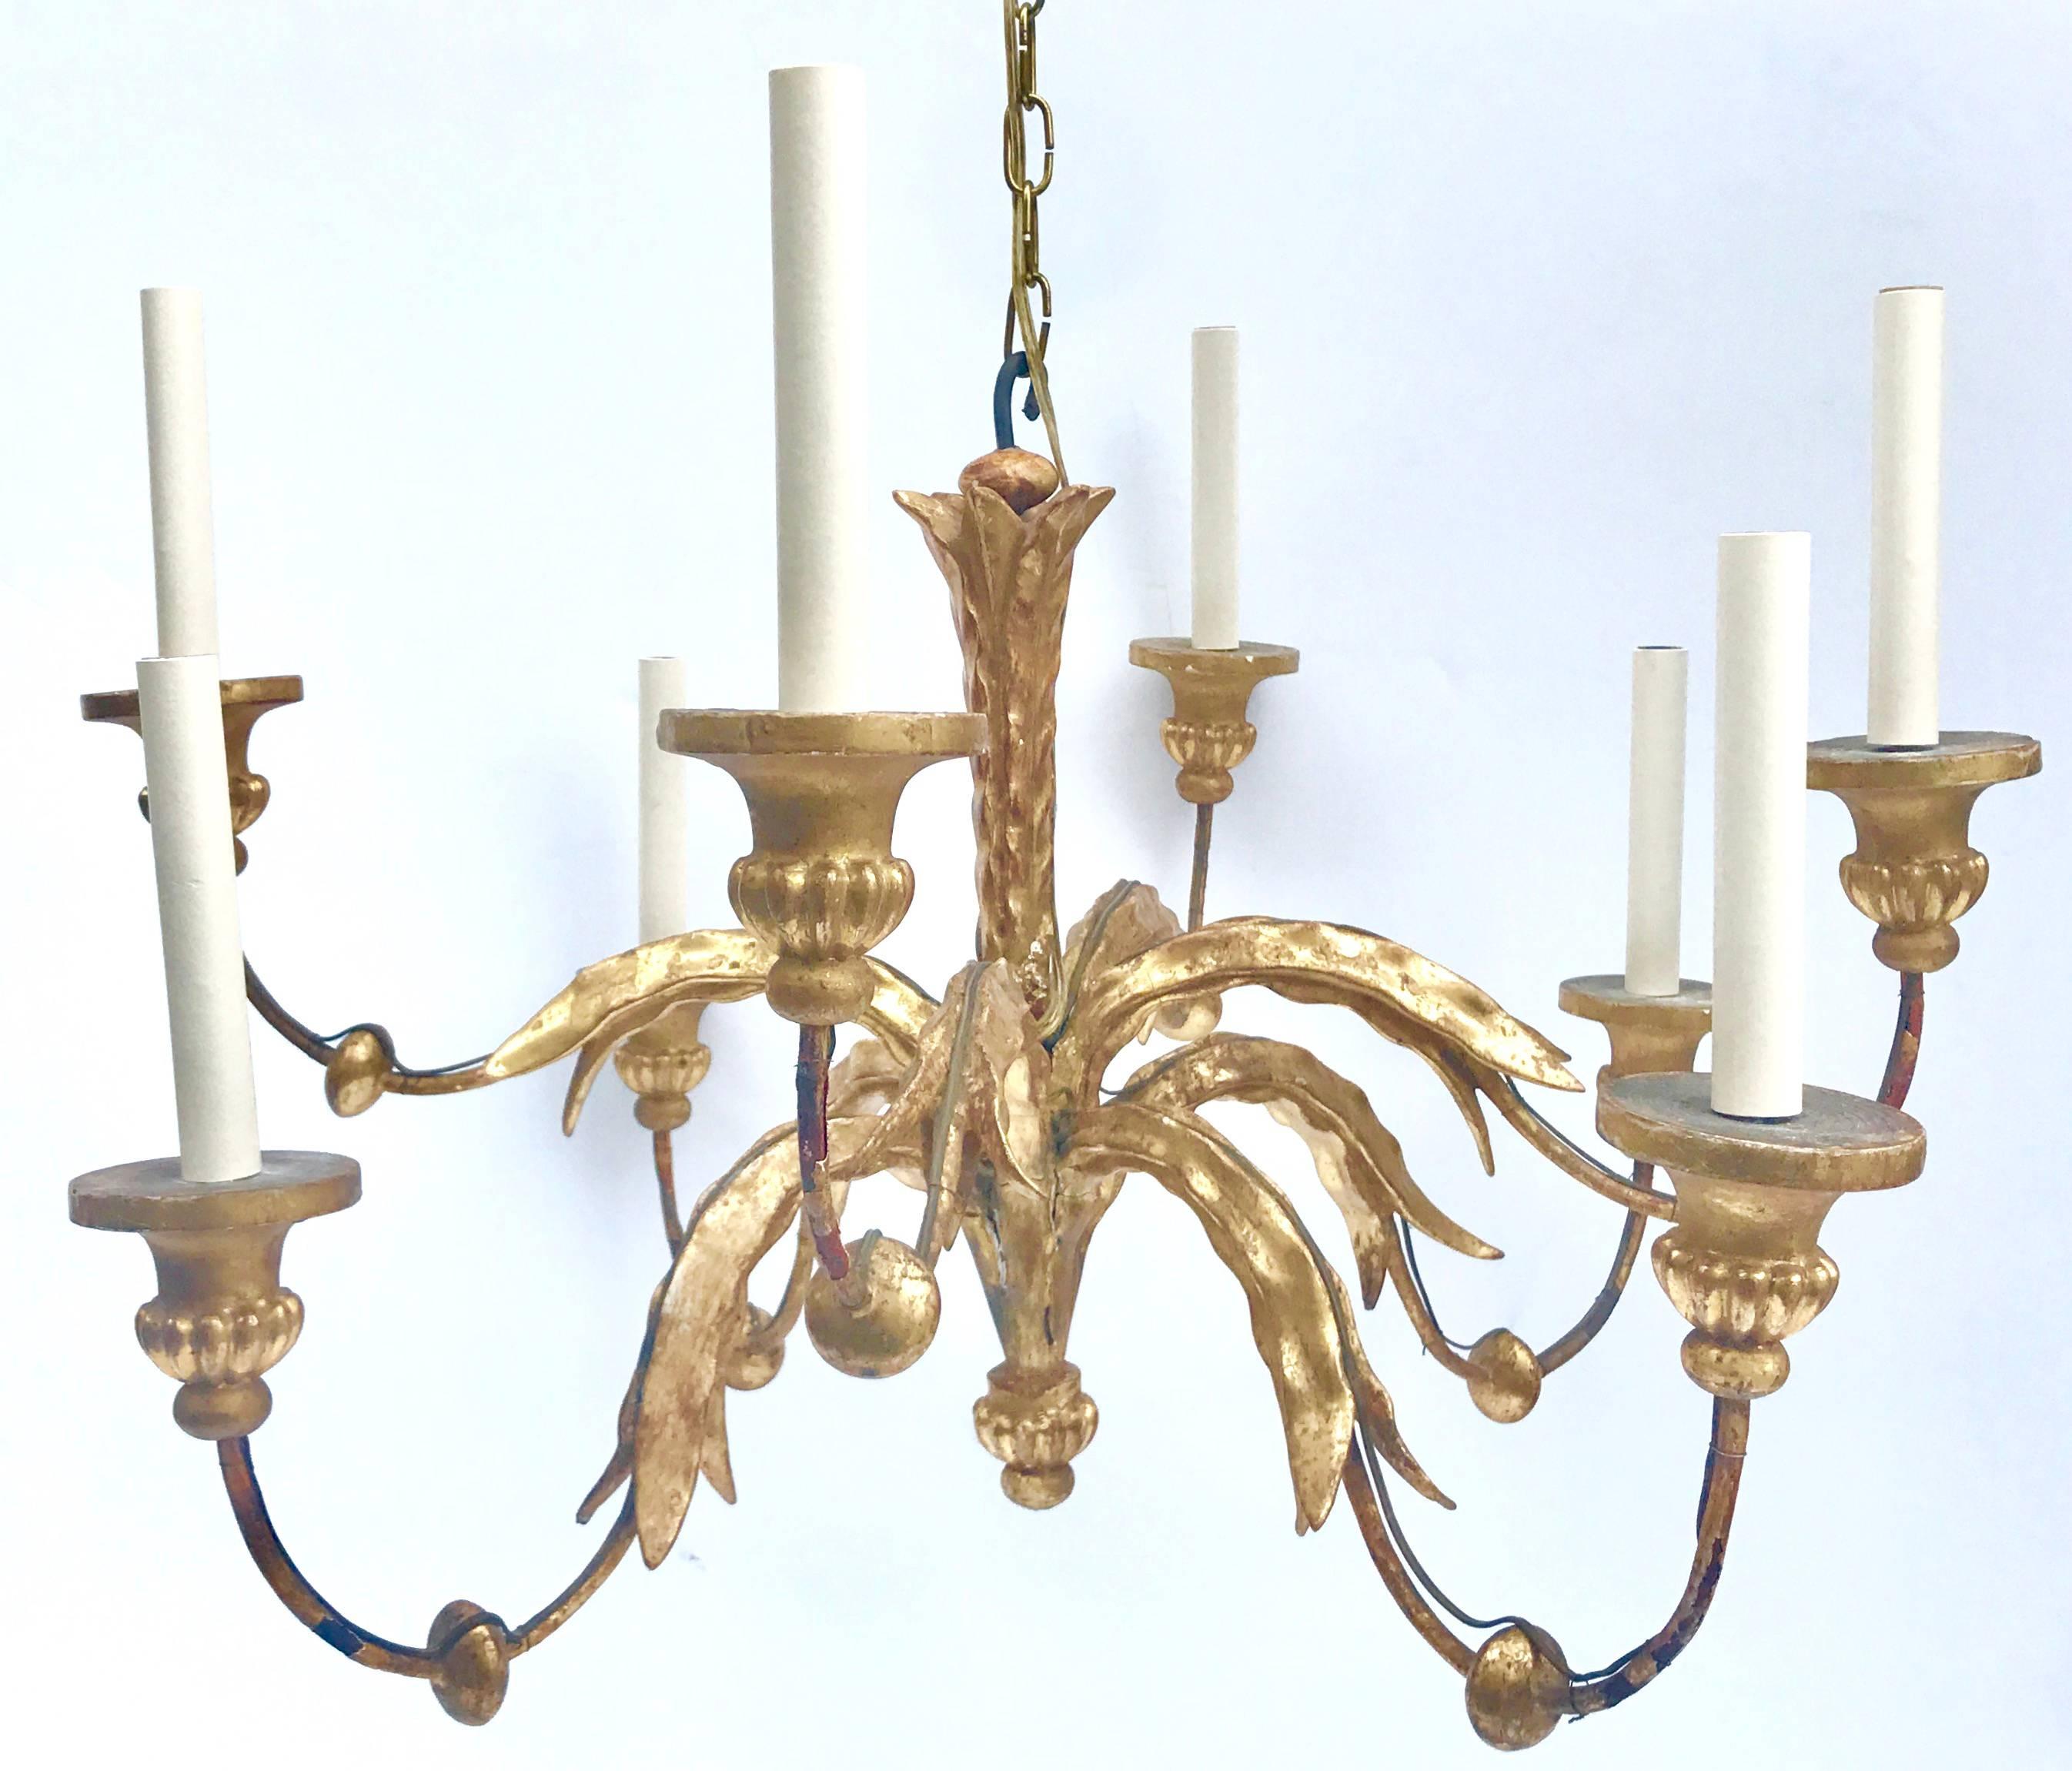 Fabulous late 19th century French water gilded wood and wrought iron eight-light chandelier.